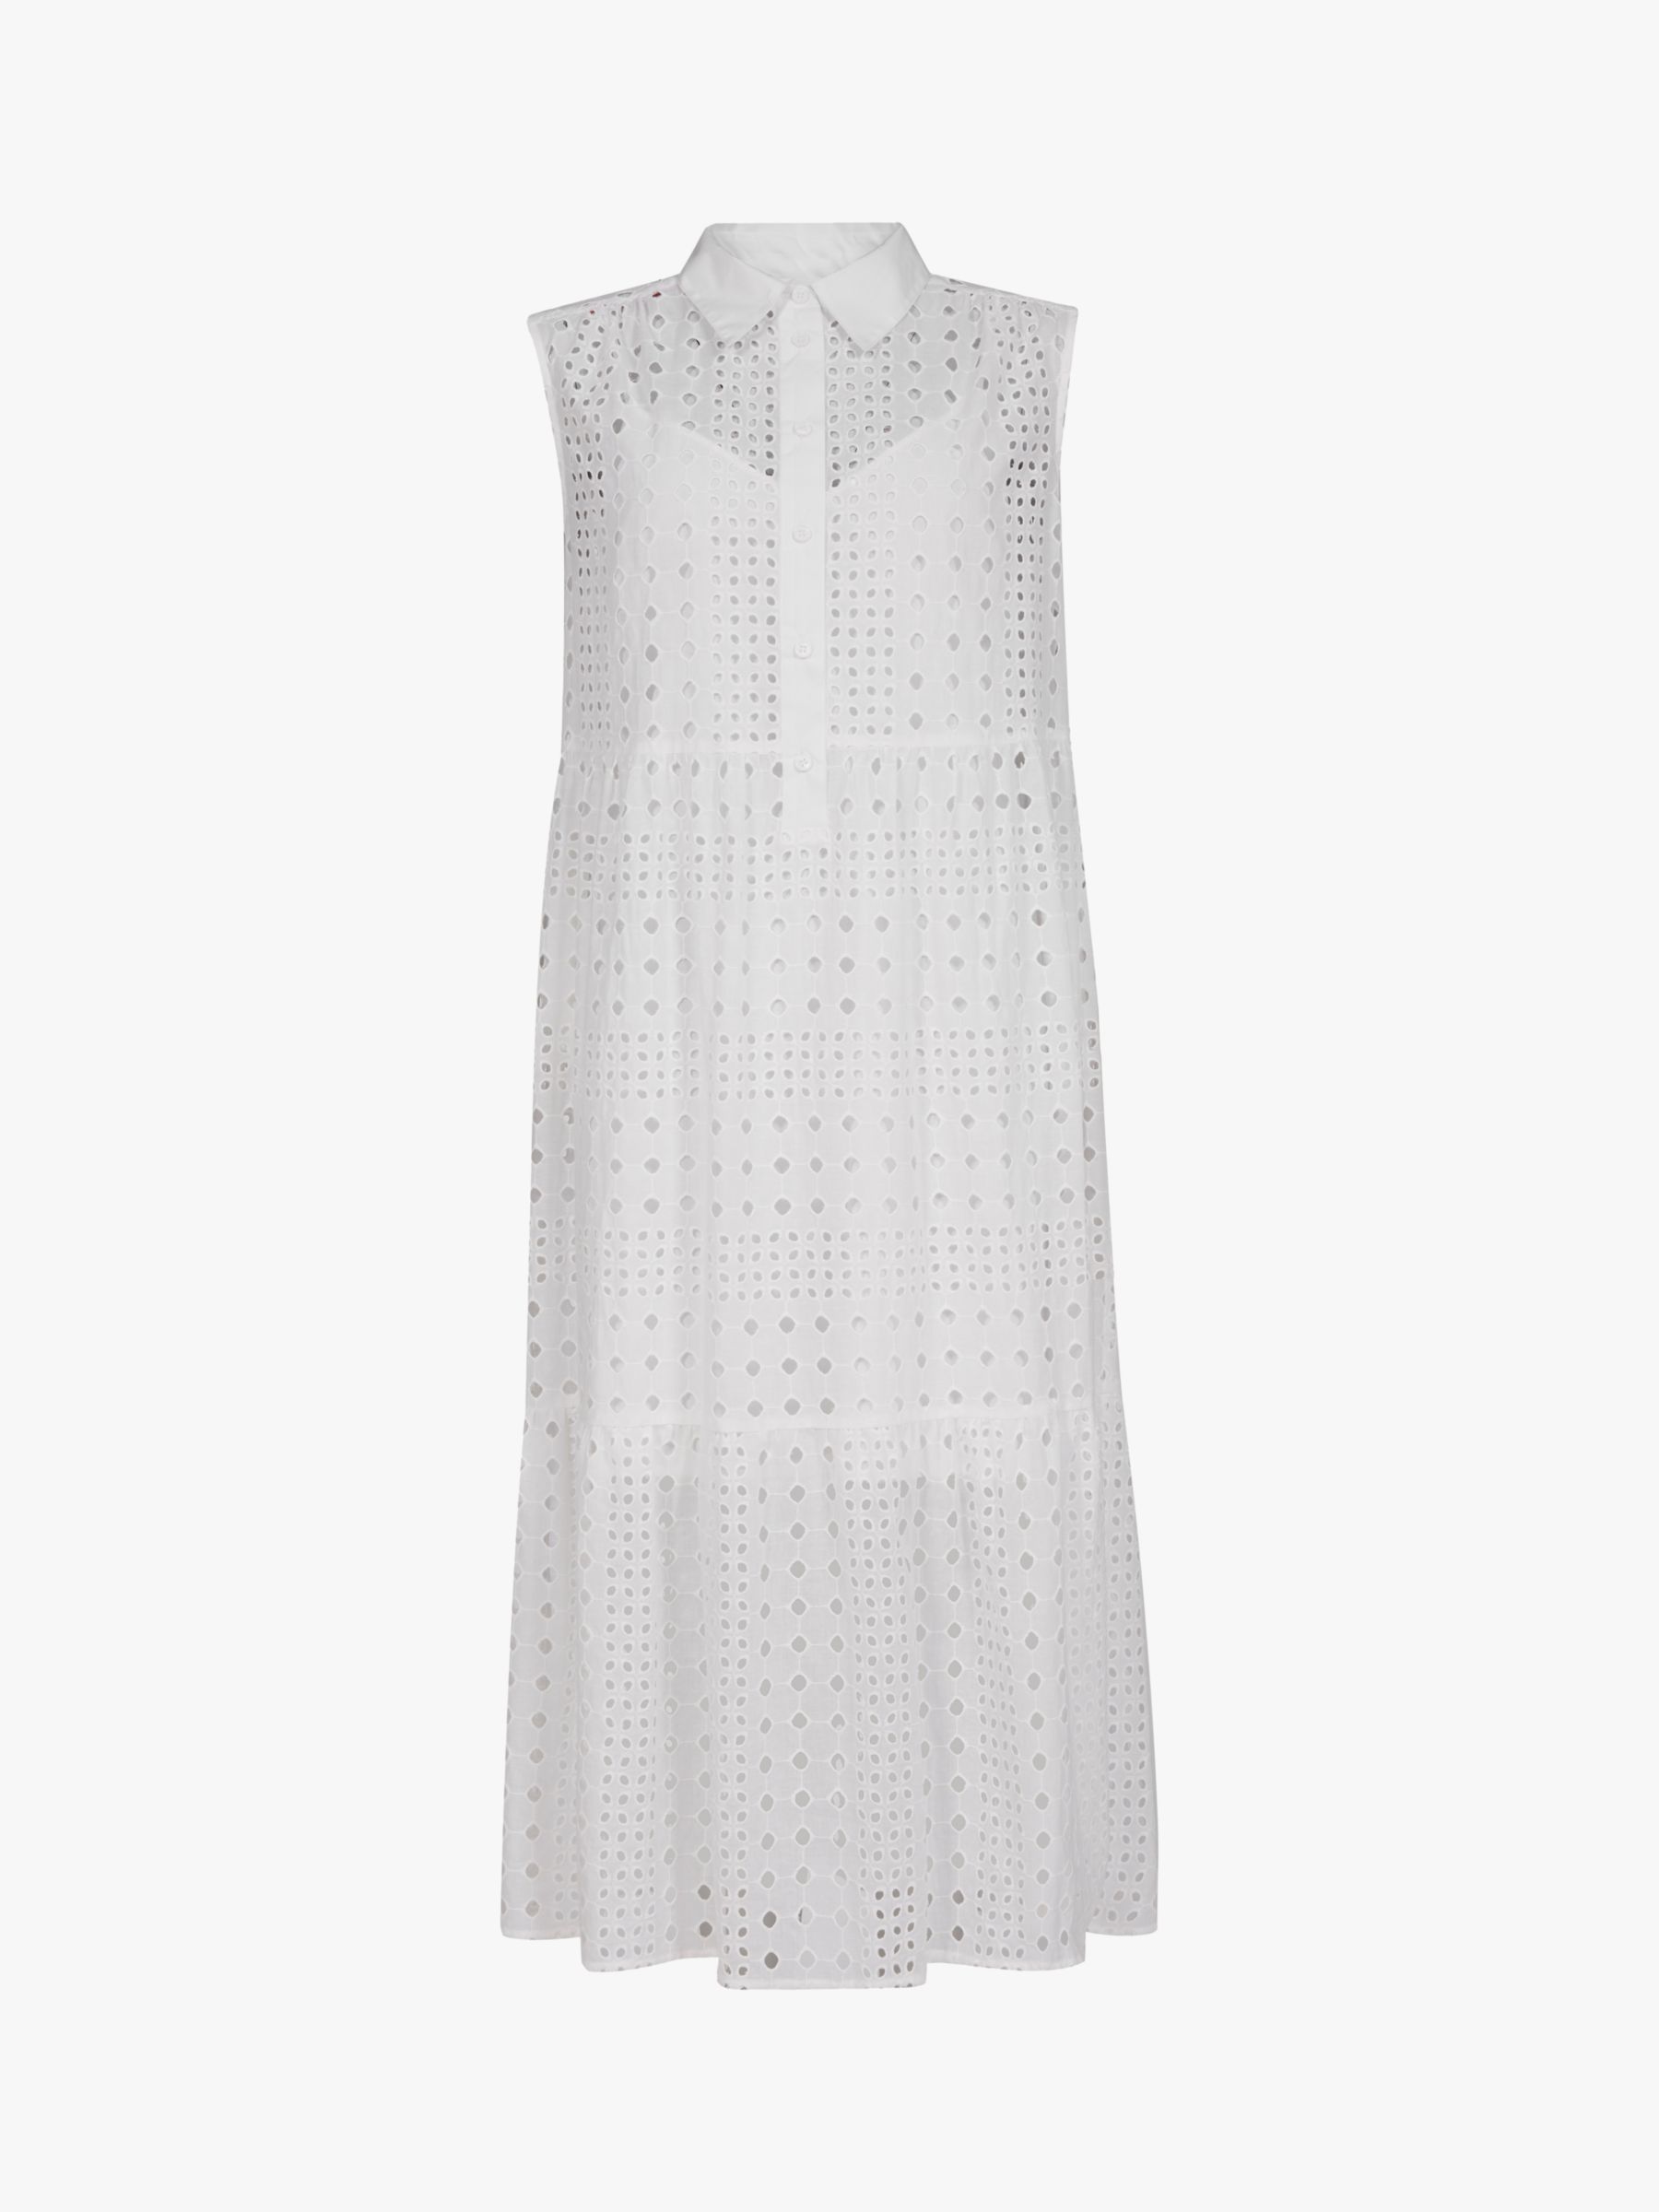 Buy Celtic & Co. Cotton Broderie Sleeveless Maxi Dress, White Online at johnlewis.com